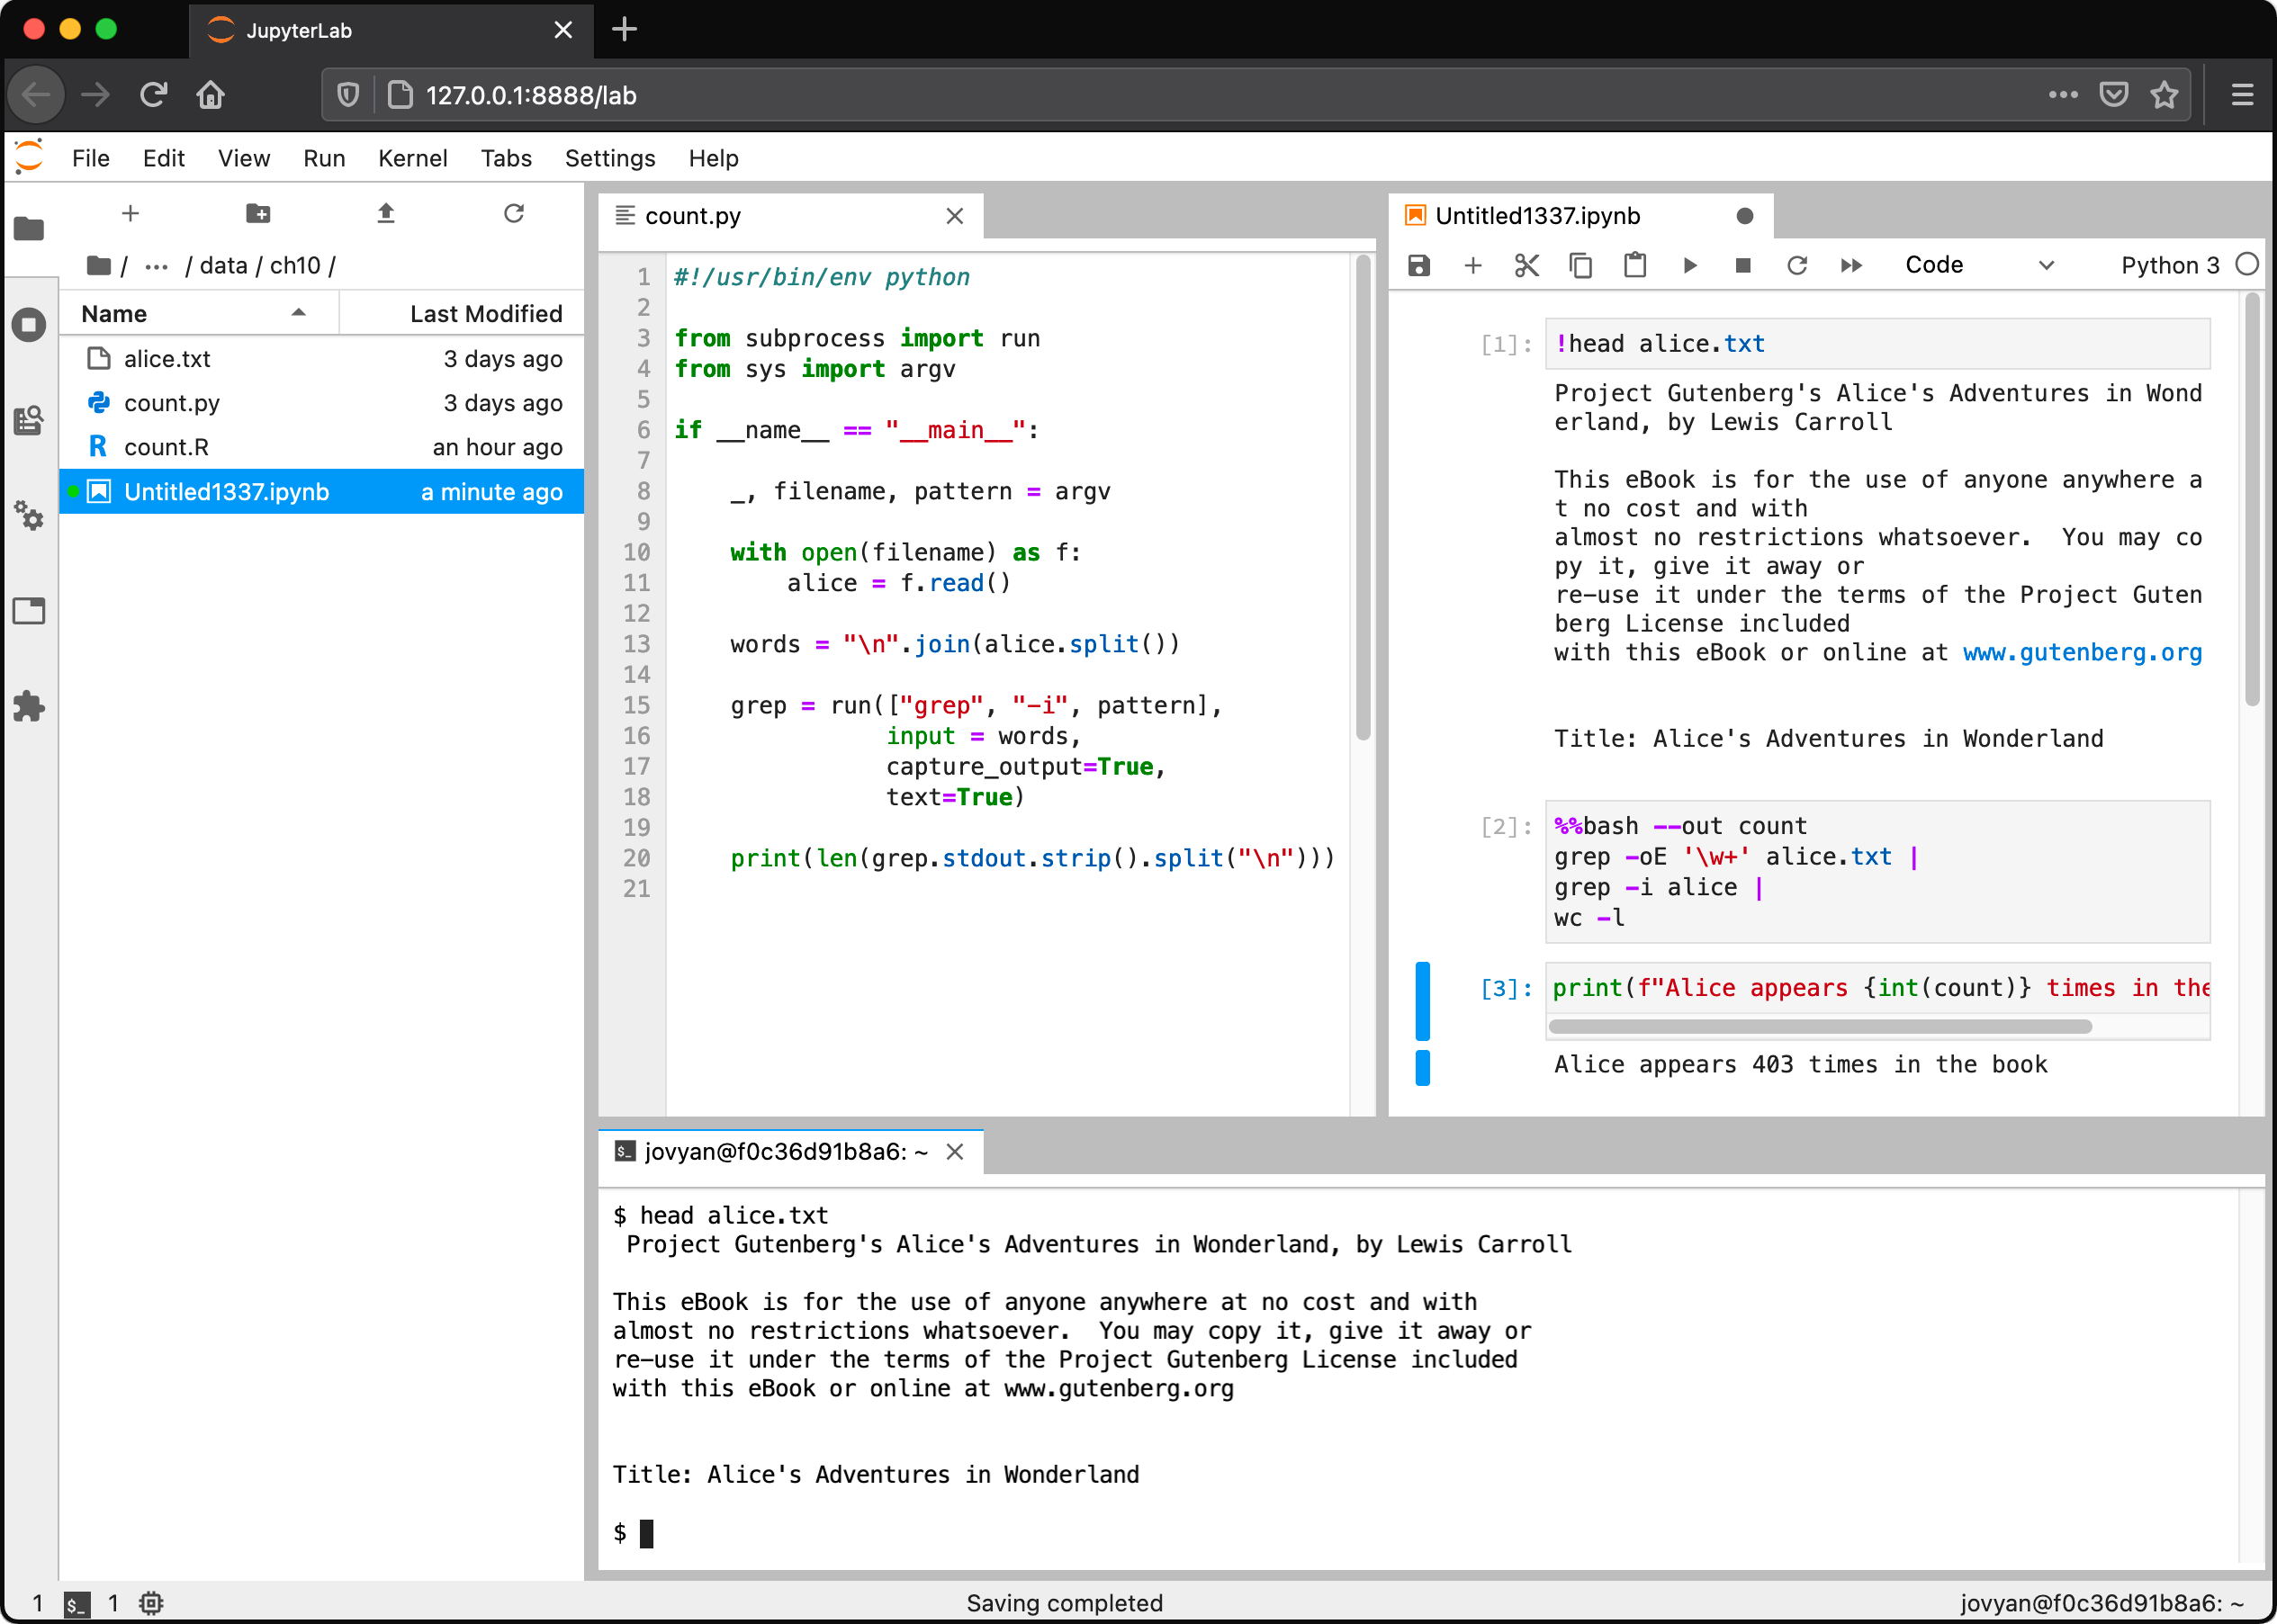 JupyterLab with the file explorer, a code editor, a notebook, and a terminal